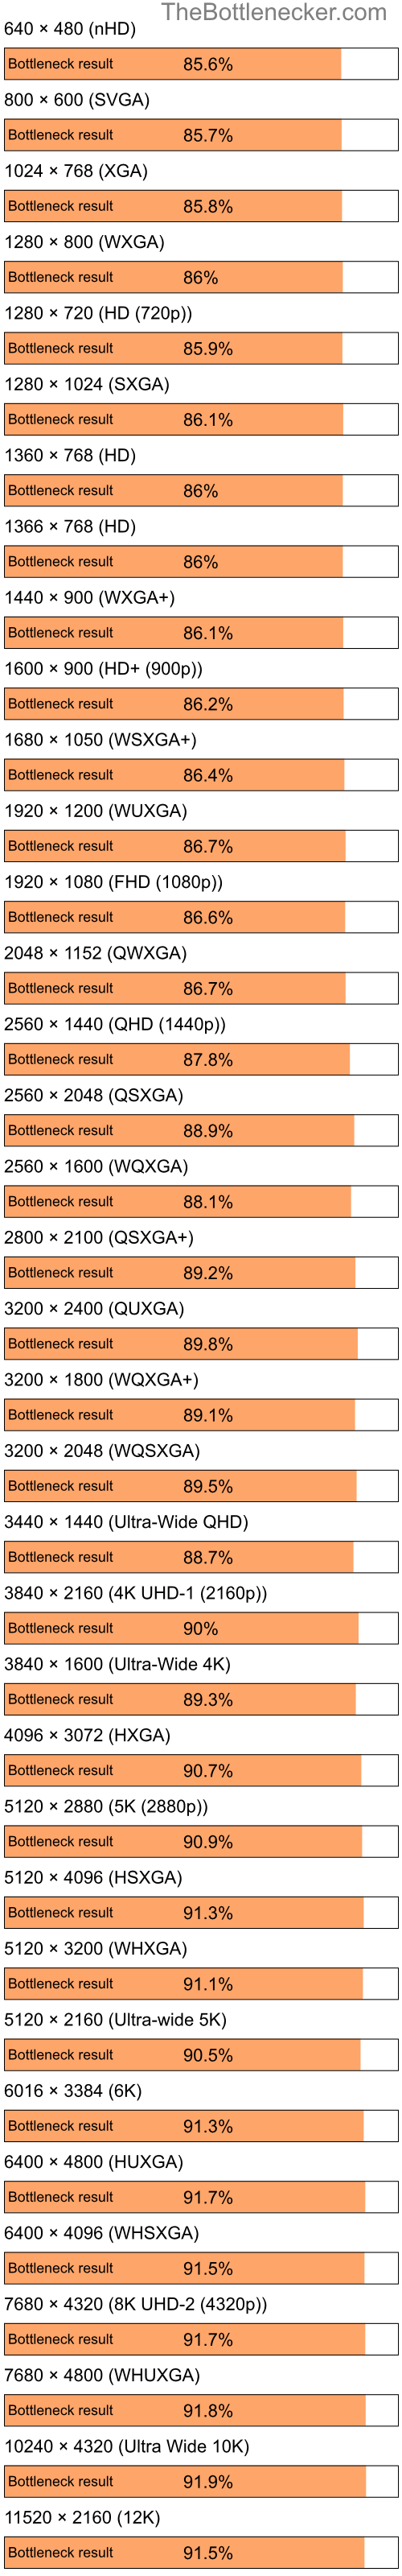 Bottleneck results by resolution for Intel Celeron M 410 and NVIDIA nForce 630M in Graphic Card Intense Tasks